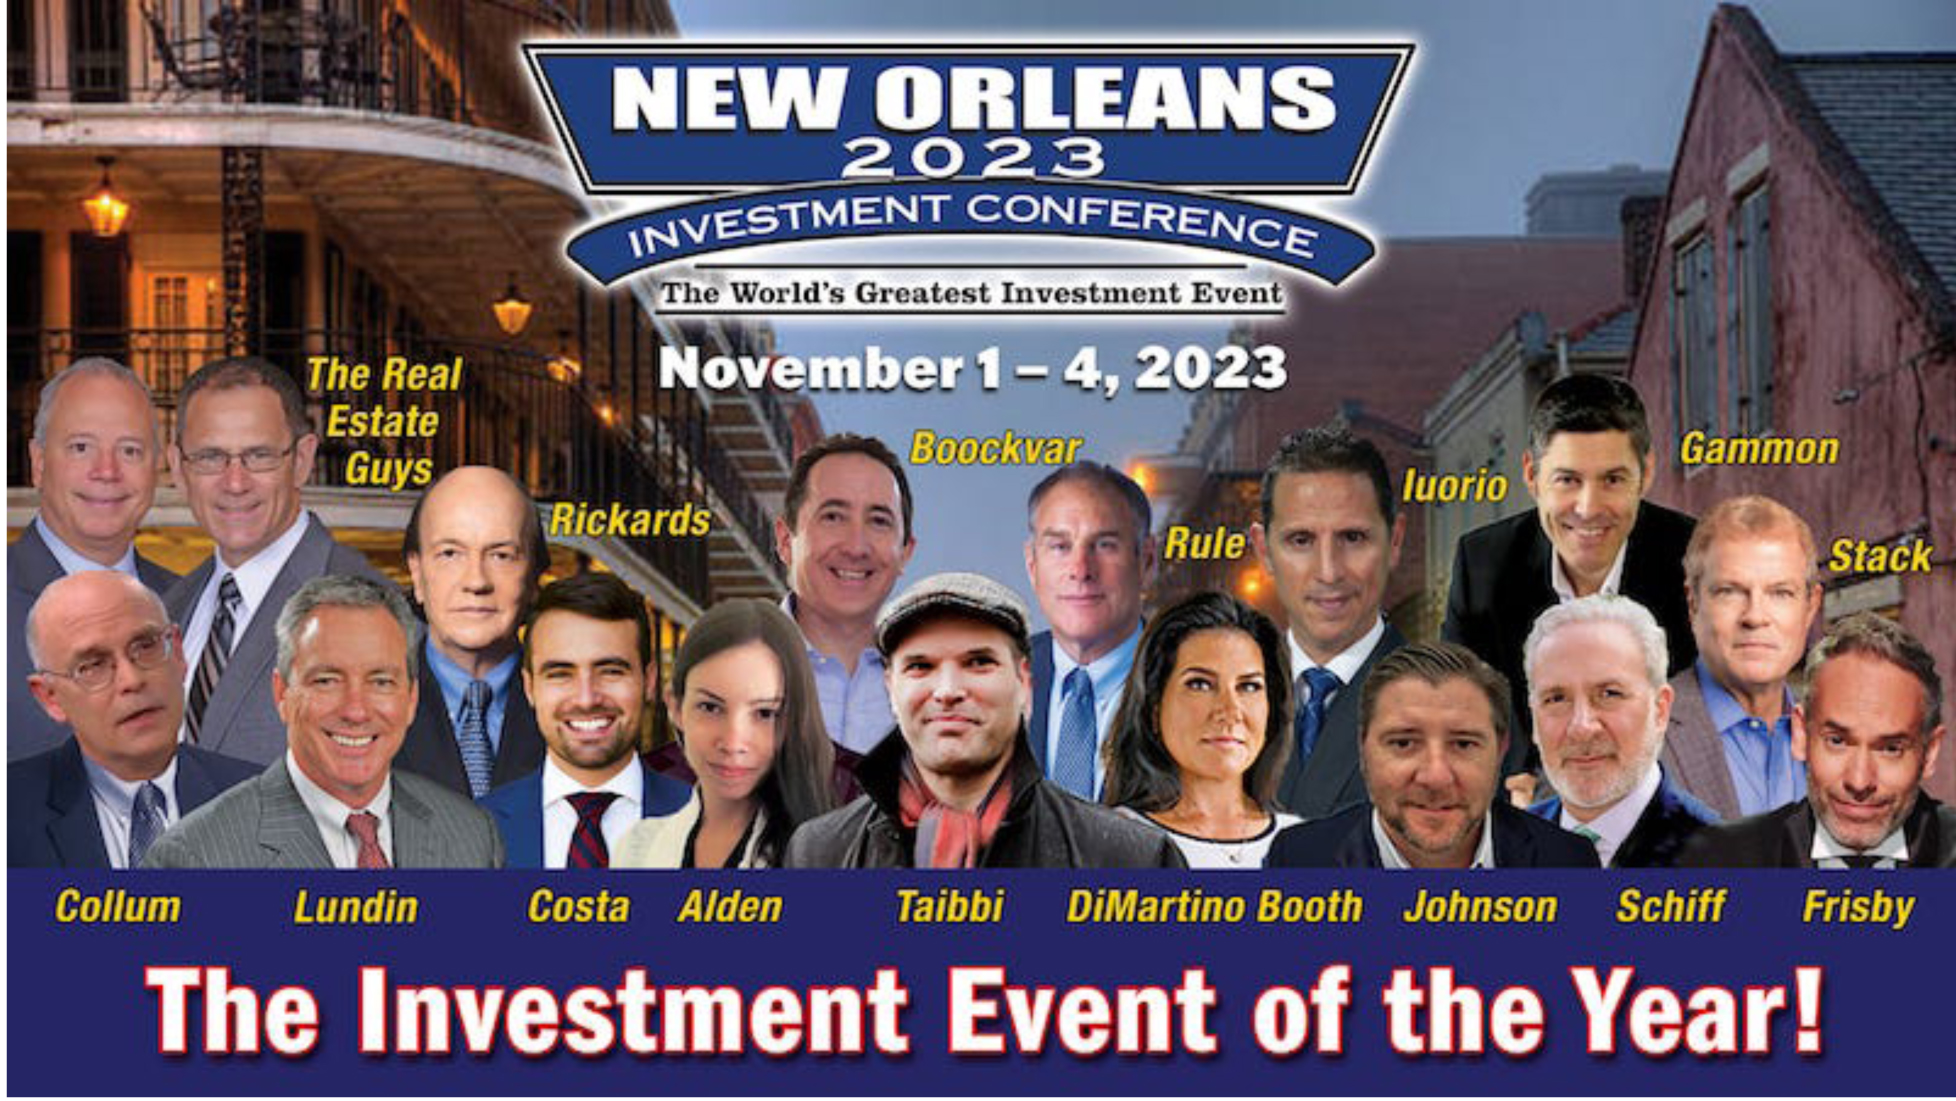 New Orleans Conference Image